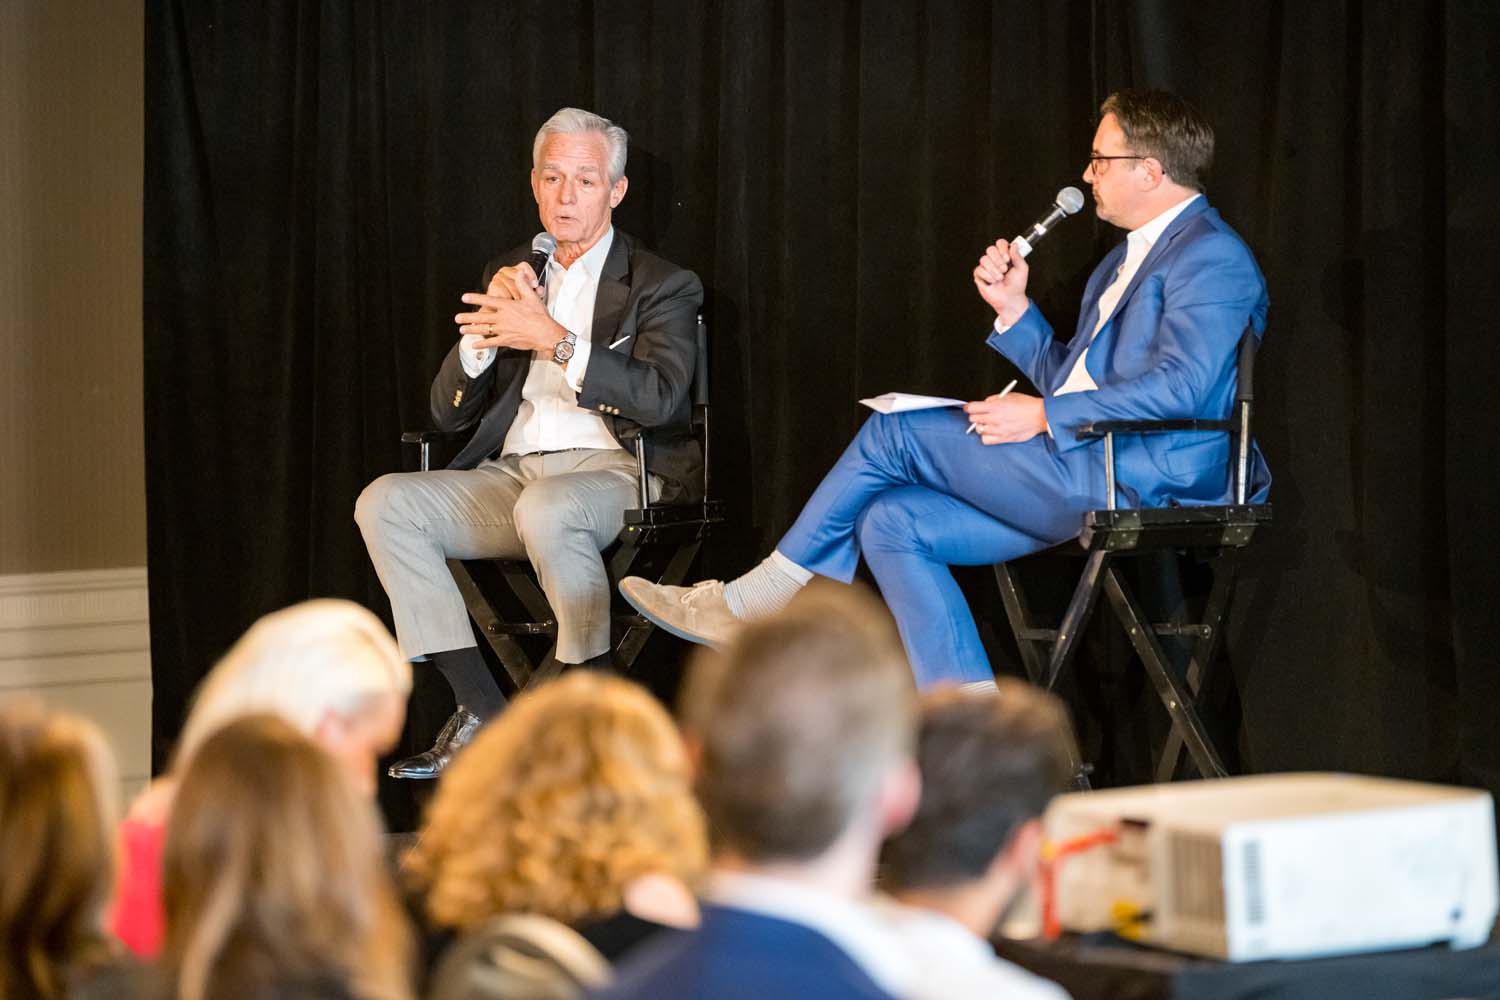 CBRE Divisional President Lew Horne Talks Policy at TRD’s LA Forum